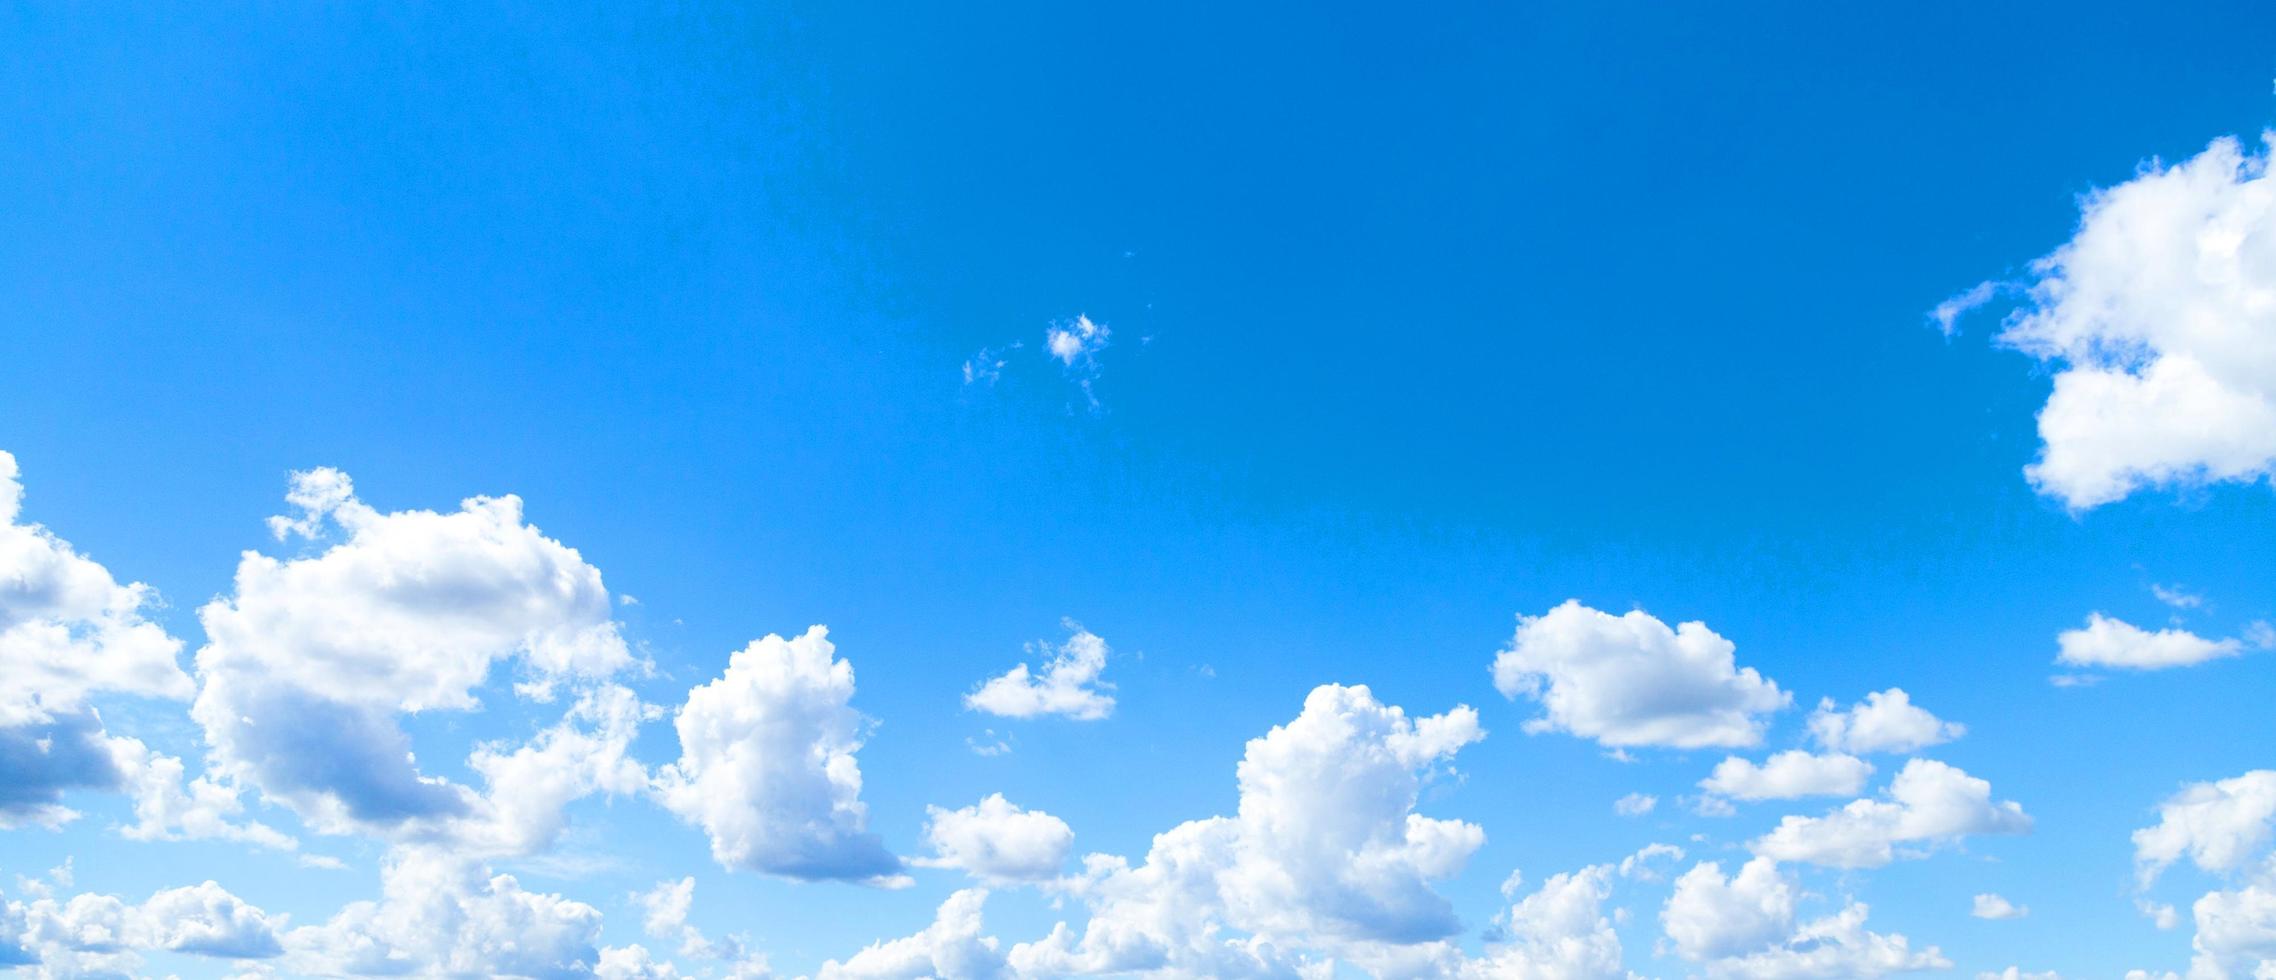 Wide sky Stock Photos, Royalty Free Wide sky Images